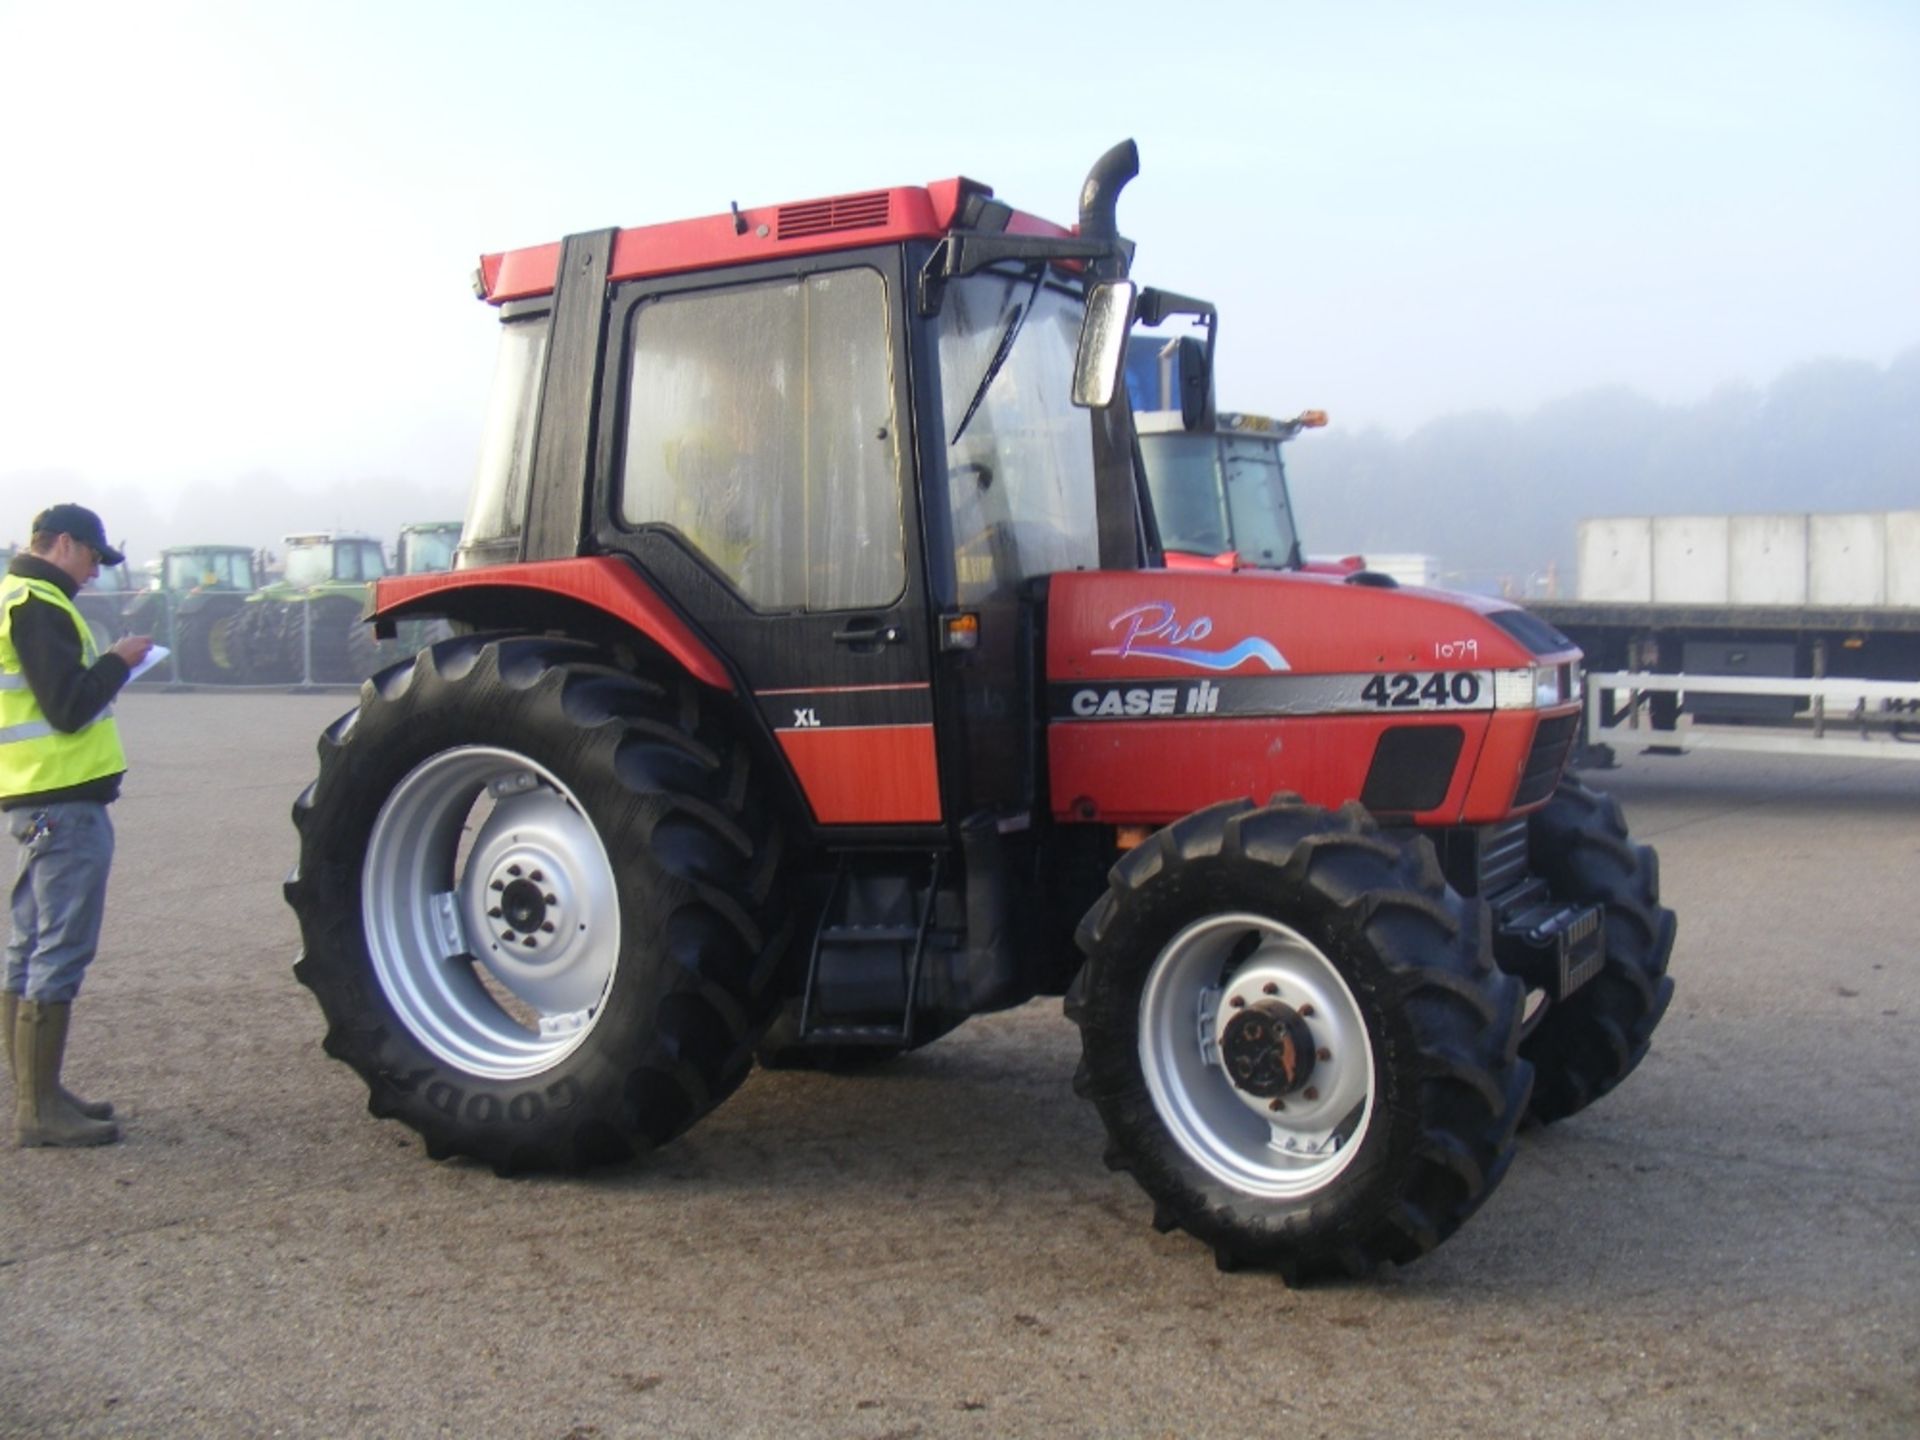 Case 4240 Pro 40k 4wd Tractor with Air Con Reg. No. R897 OJR - Image 3 of 5